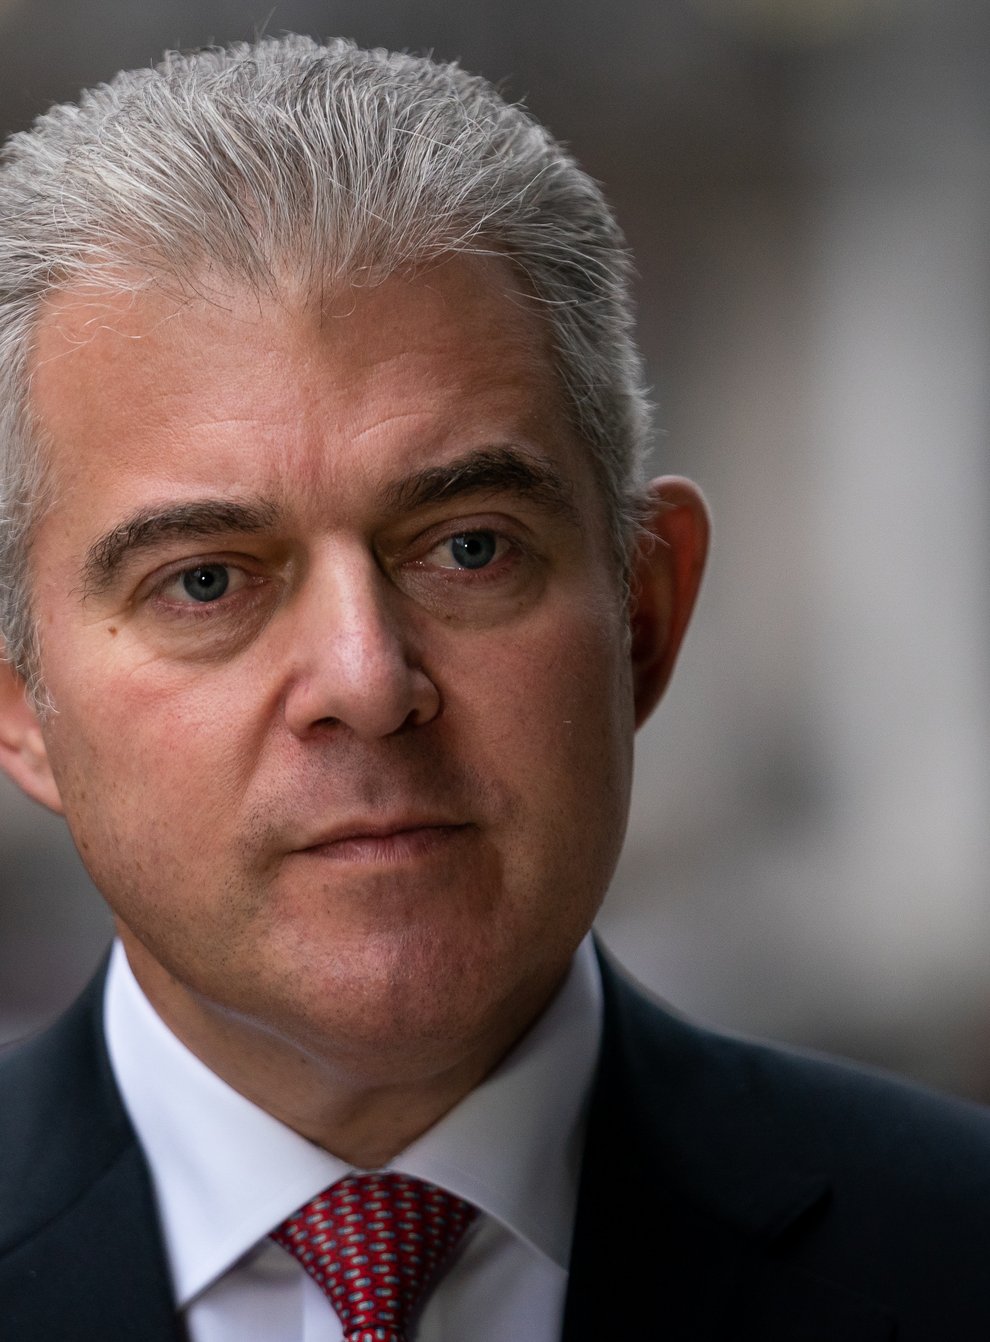 Northern Ireland Secretary Brandon Lewis has urged DUP leader Sir Jeffrey Donaldson to nominate a deputy First Minister to allow the resumption of fully functioning devolved government in Northern Ireland. (PA)